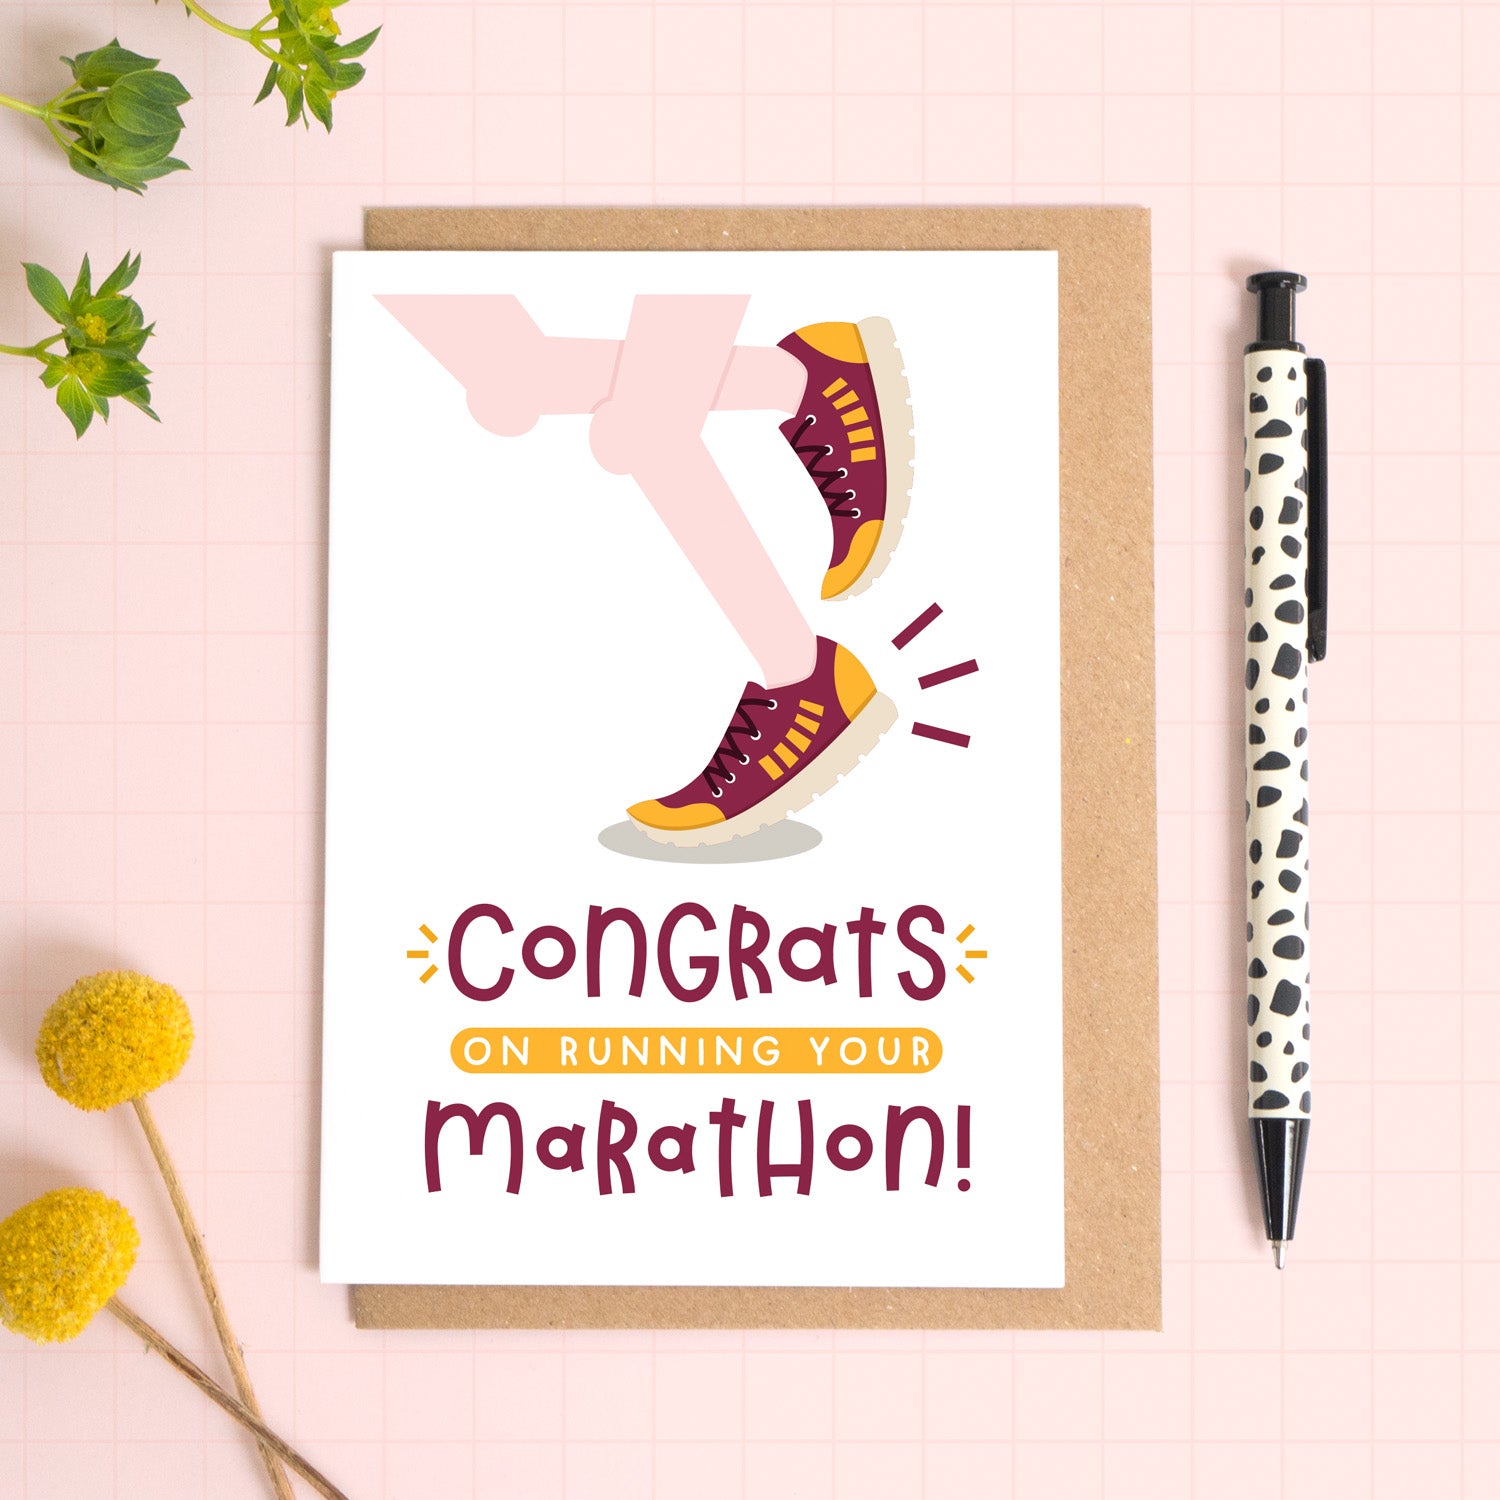 A marathon congratulations card photographed on top of a kraft brown envelope set on a pink background surrounded by foliage and a pen for scale. The card reads 'congrats on running your marathon' and features a pair of pale pink legs.